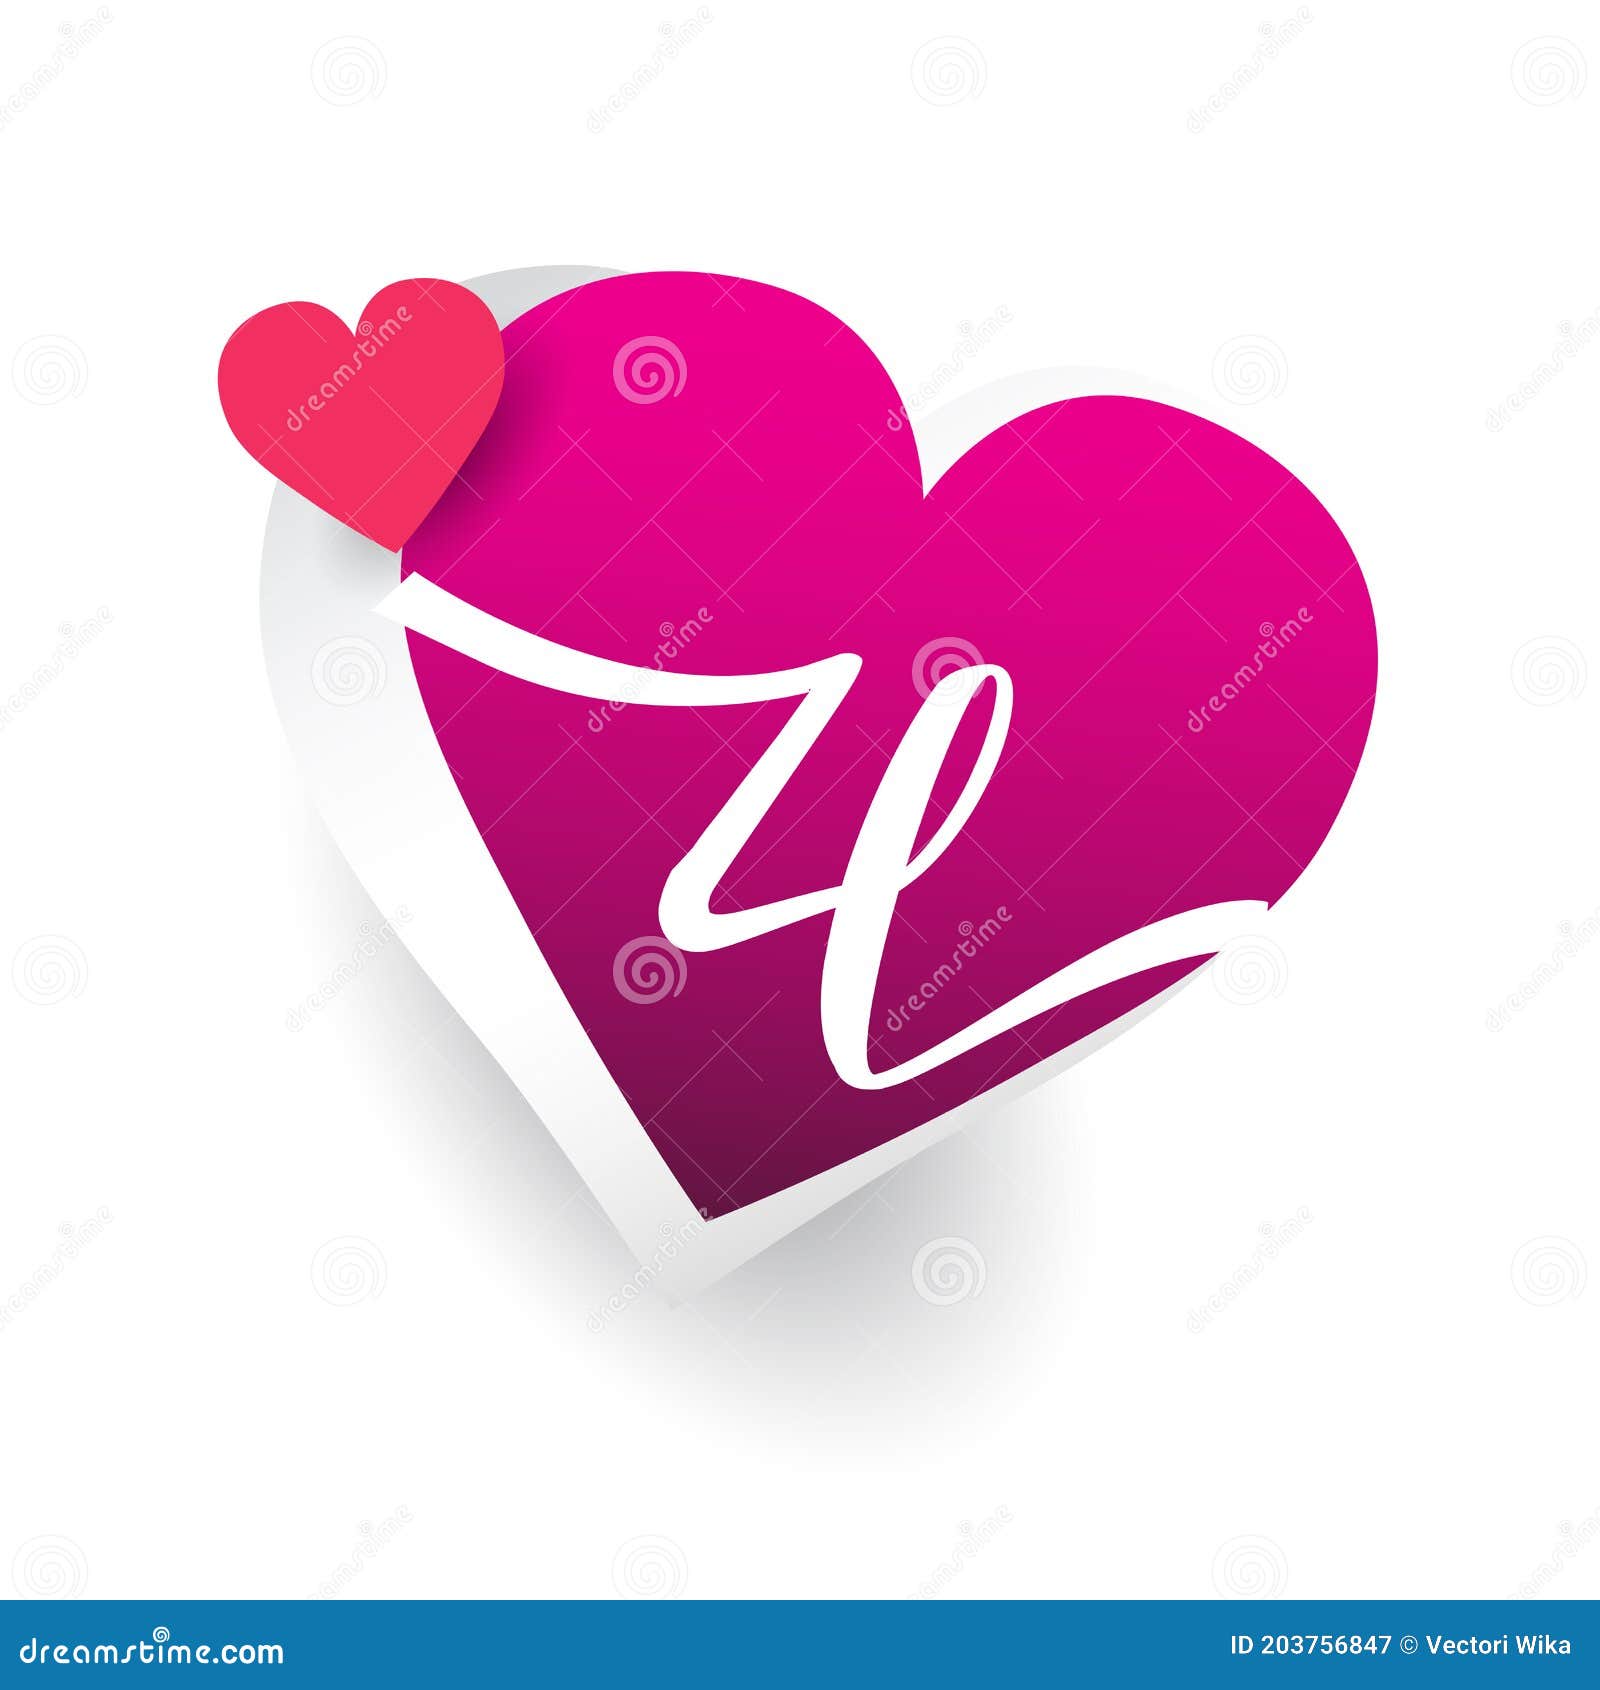 Initial Logo Letter ZL with Heart Shape Red Colored, Logo Design